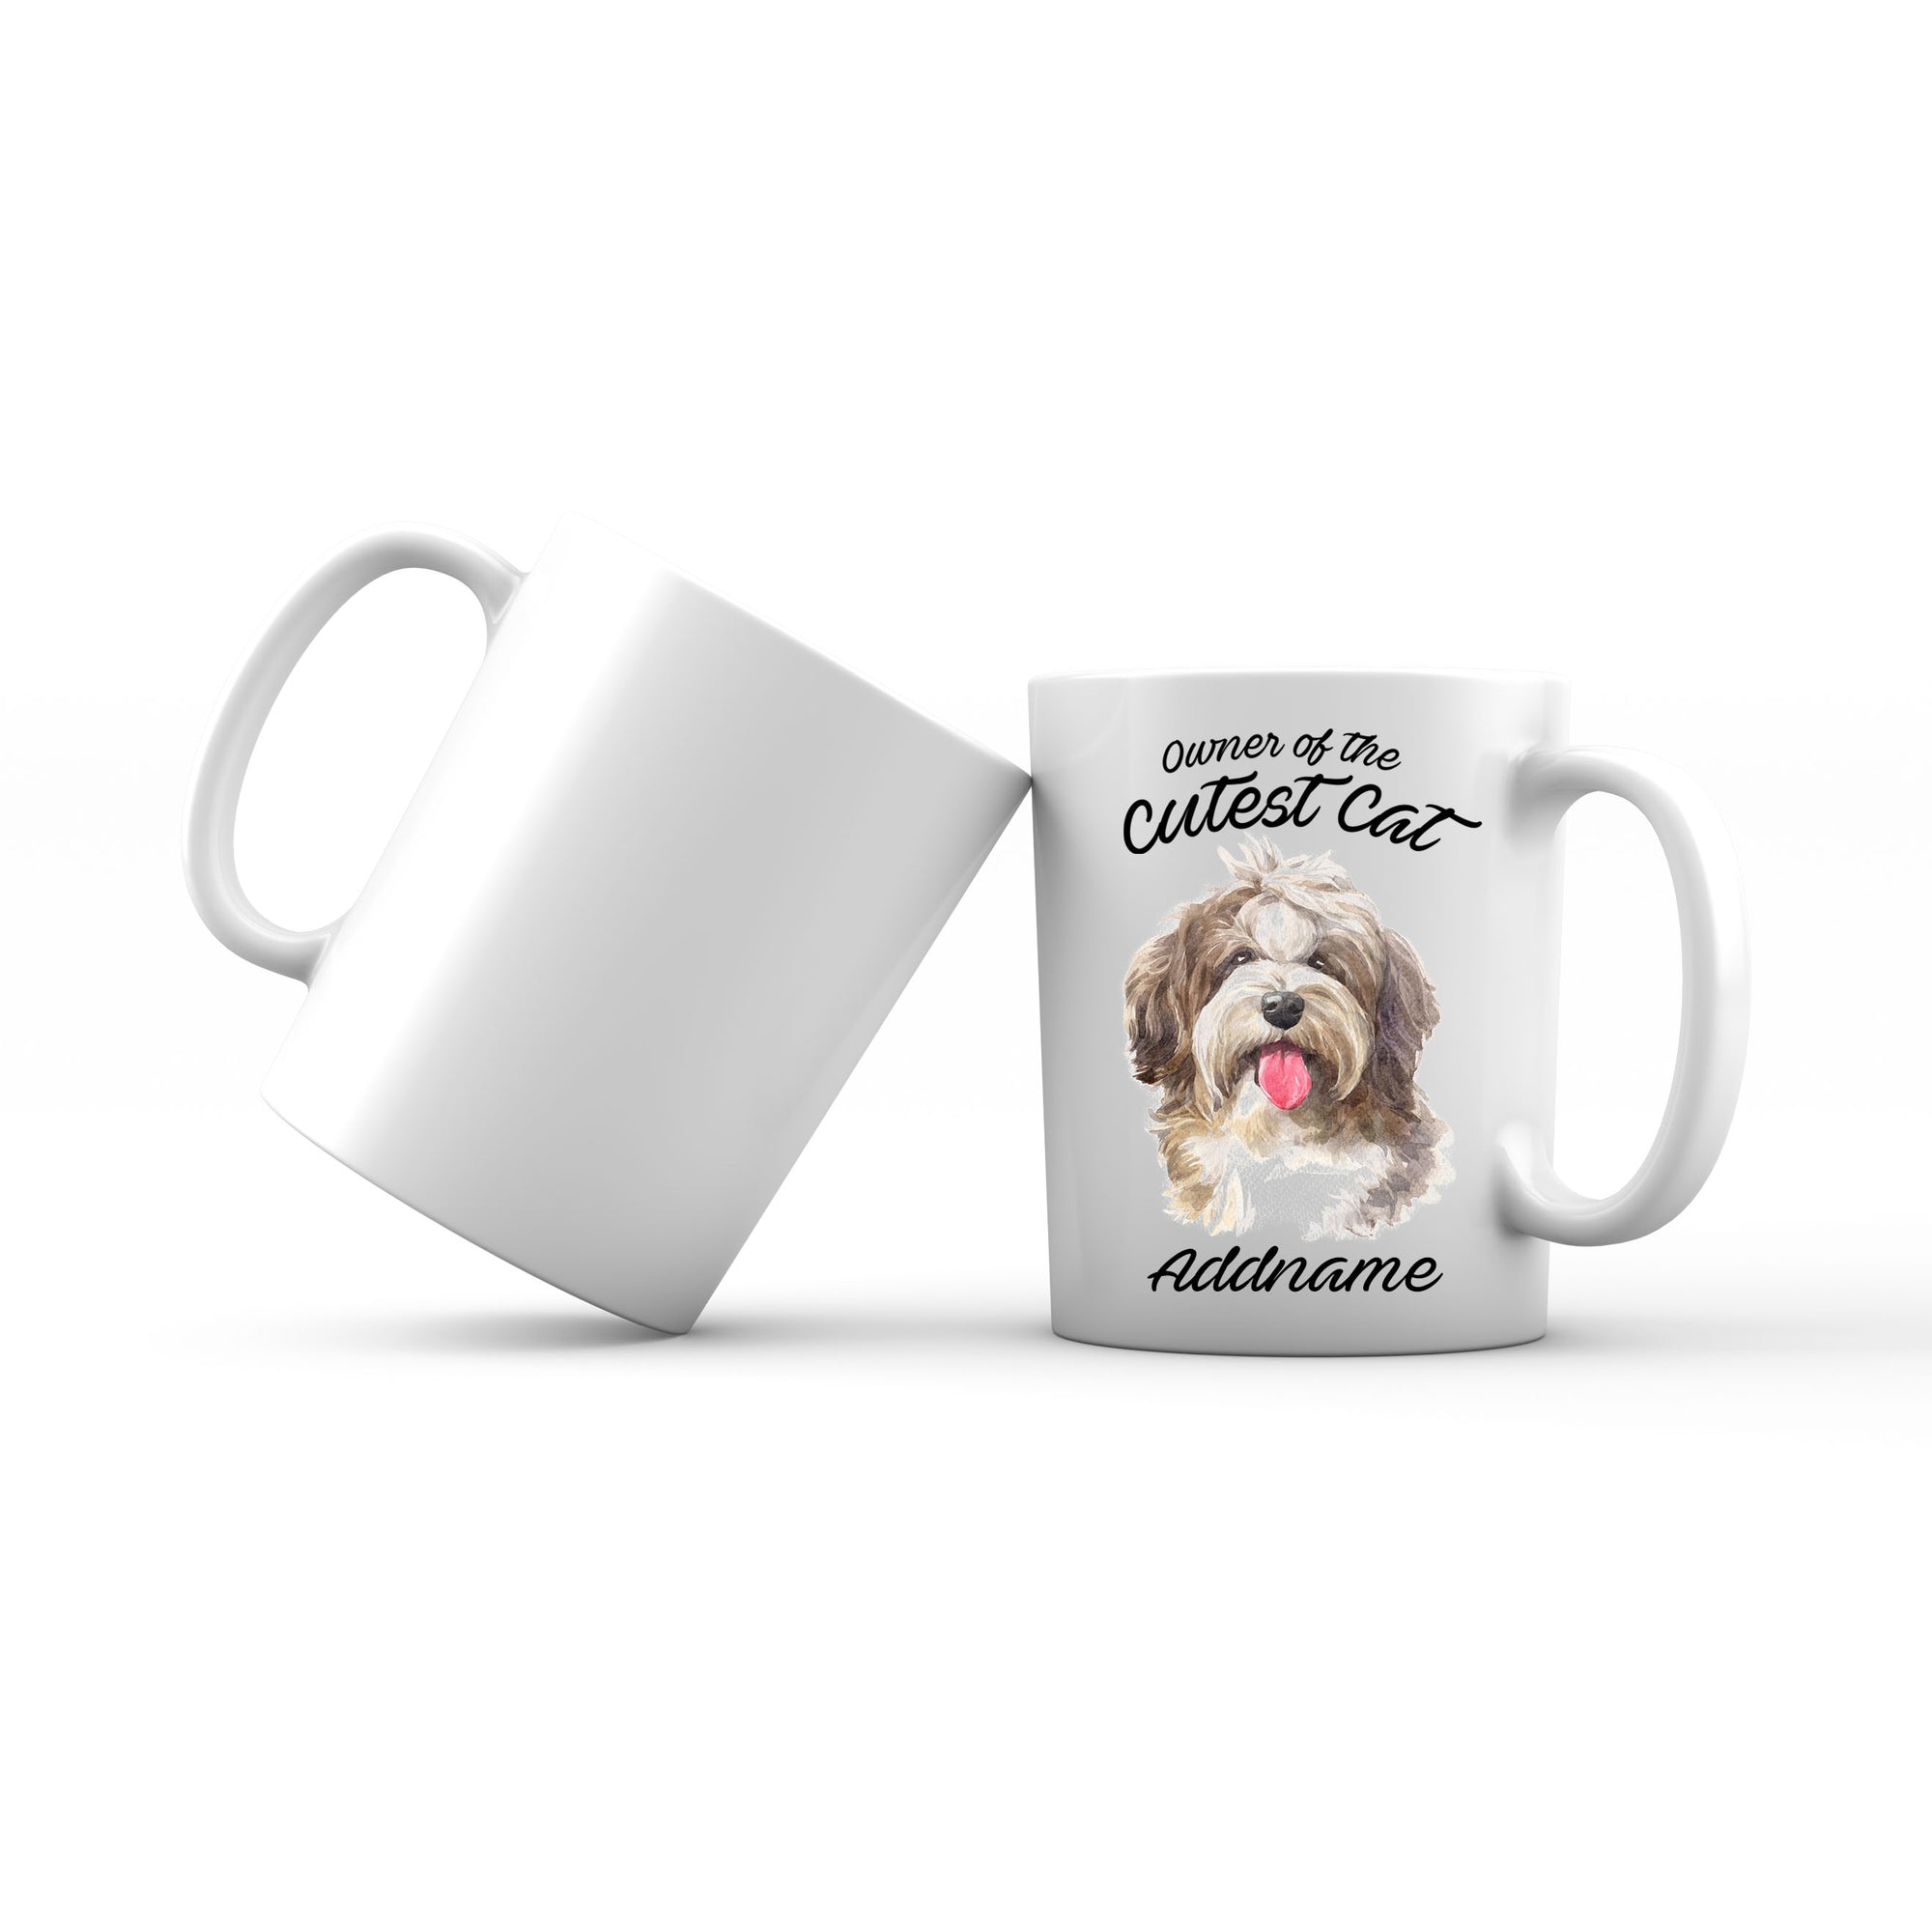 Watercolor Dog Owner Of The Cutest Dog Shaggy Havanese Addname Mug